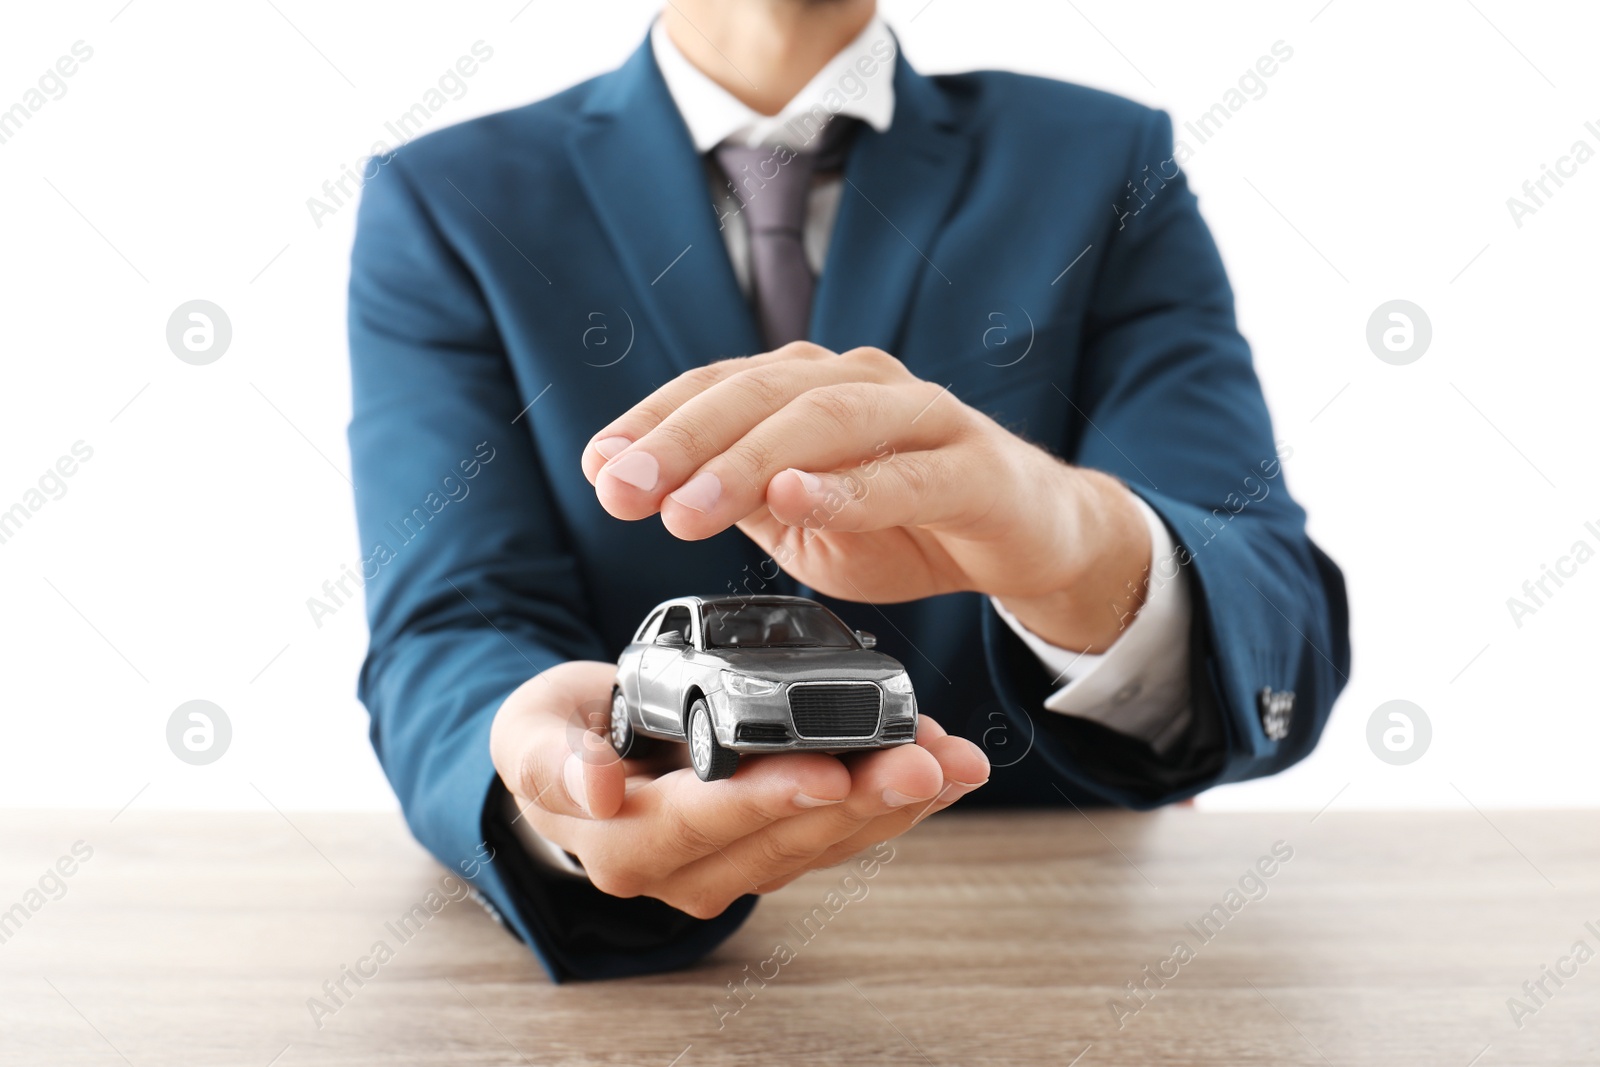 Photo of Insurance agent holding toy car in hands over table against white background